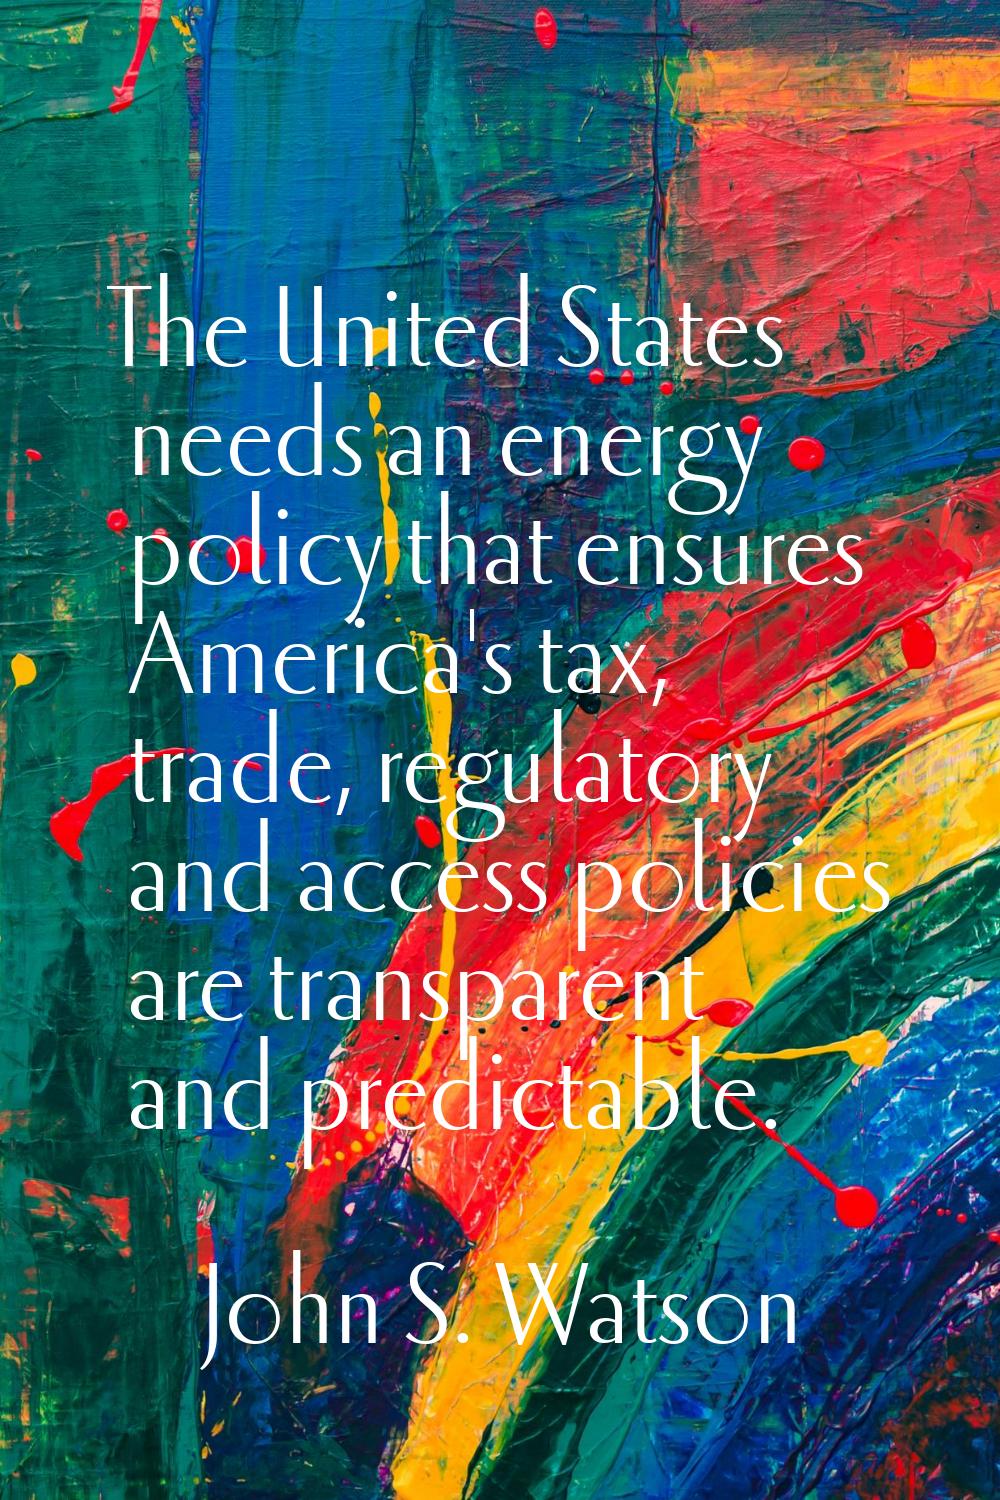 The United States needs an energy policy that ensures America's tax, trade, regulatory and access p